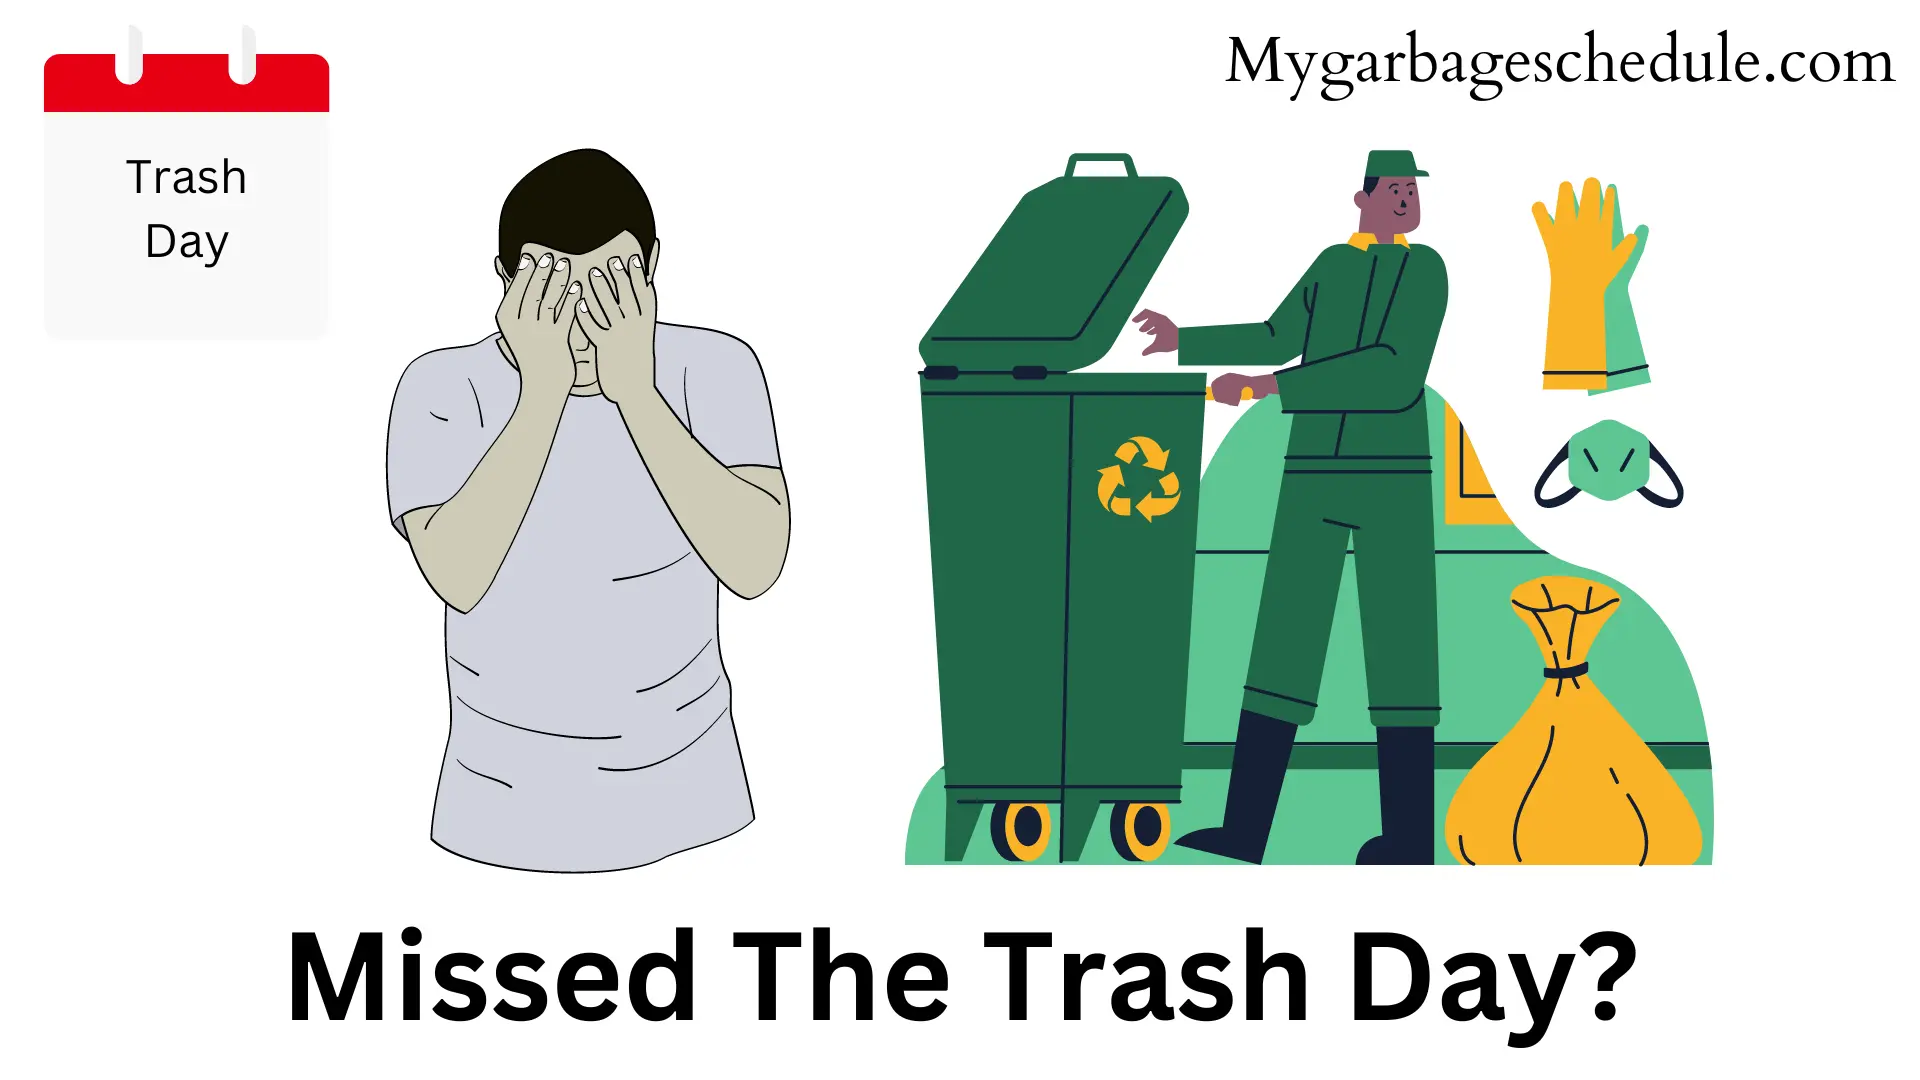 Missed The Trash Day